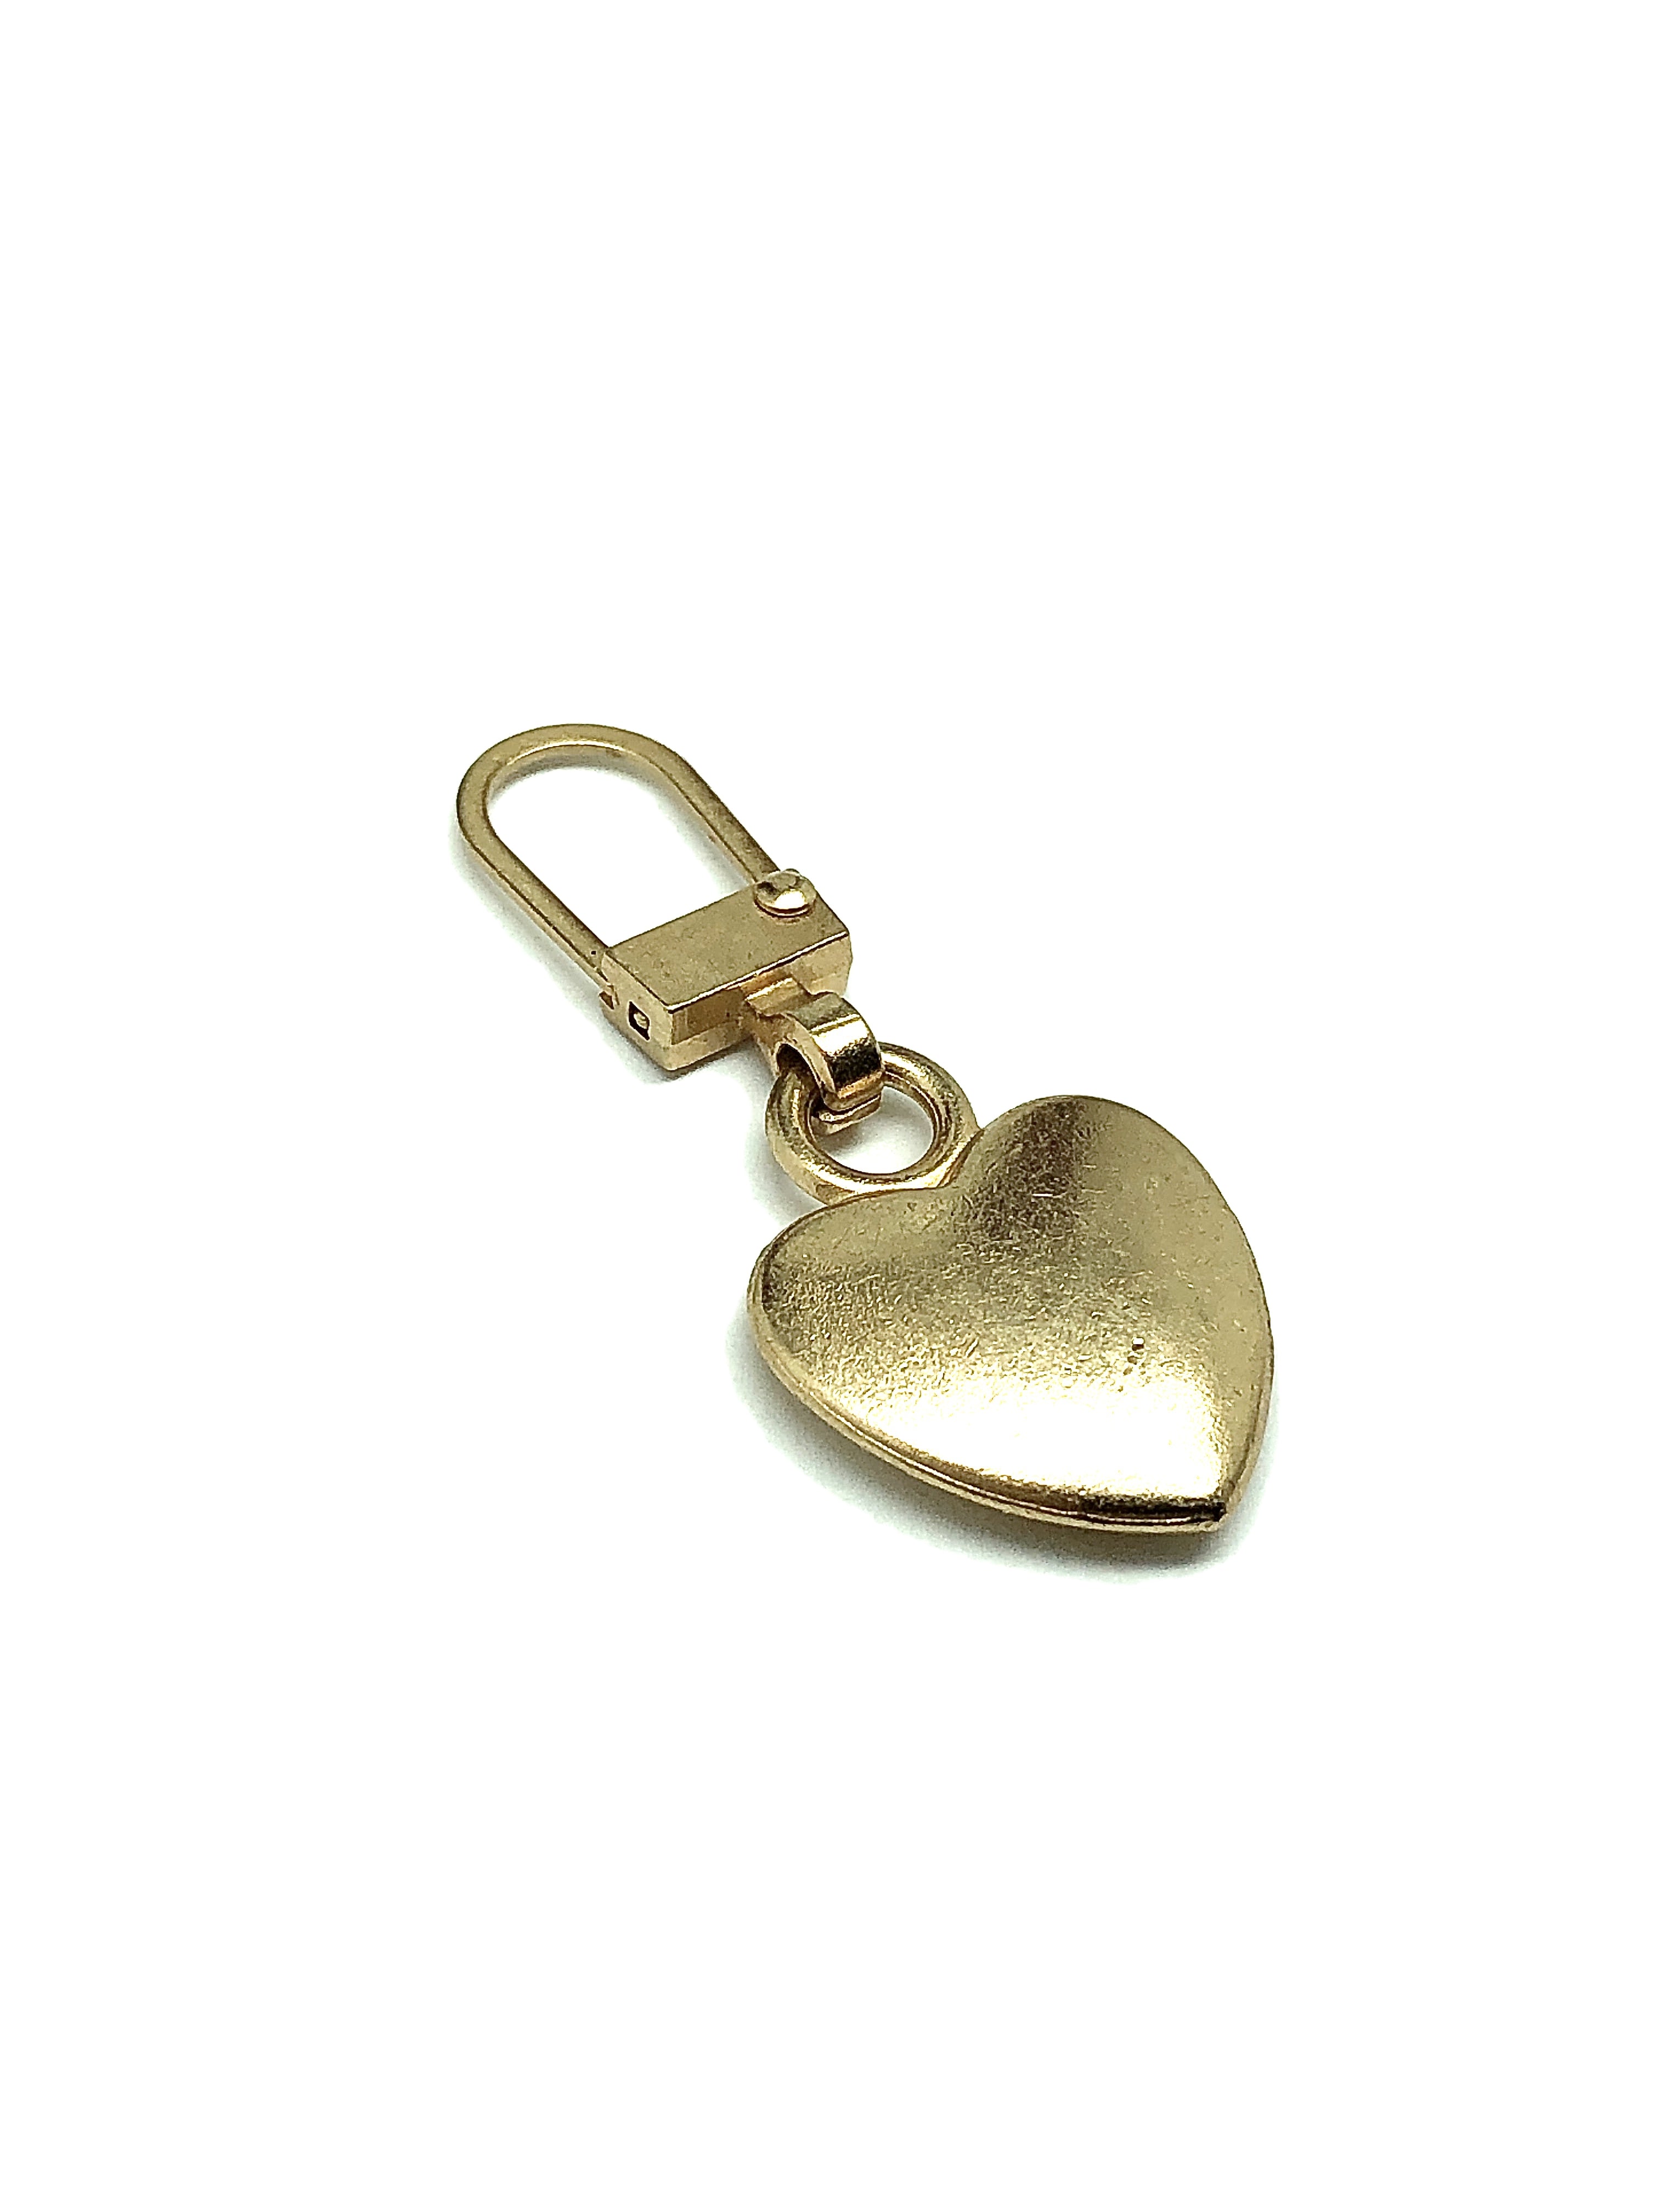 Zipper Repair Charm Heart Rustic Black - for Repair or Decorate Shoes,  Purses, Keychains + More